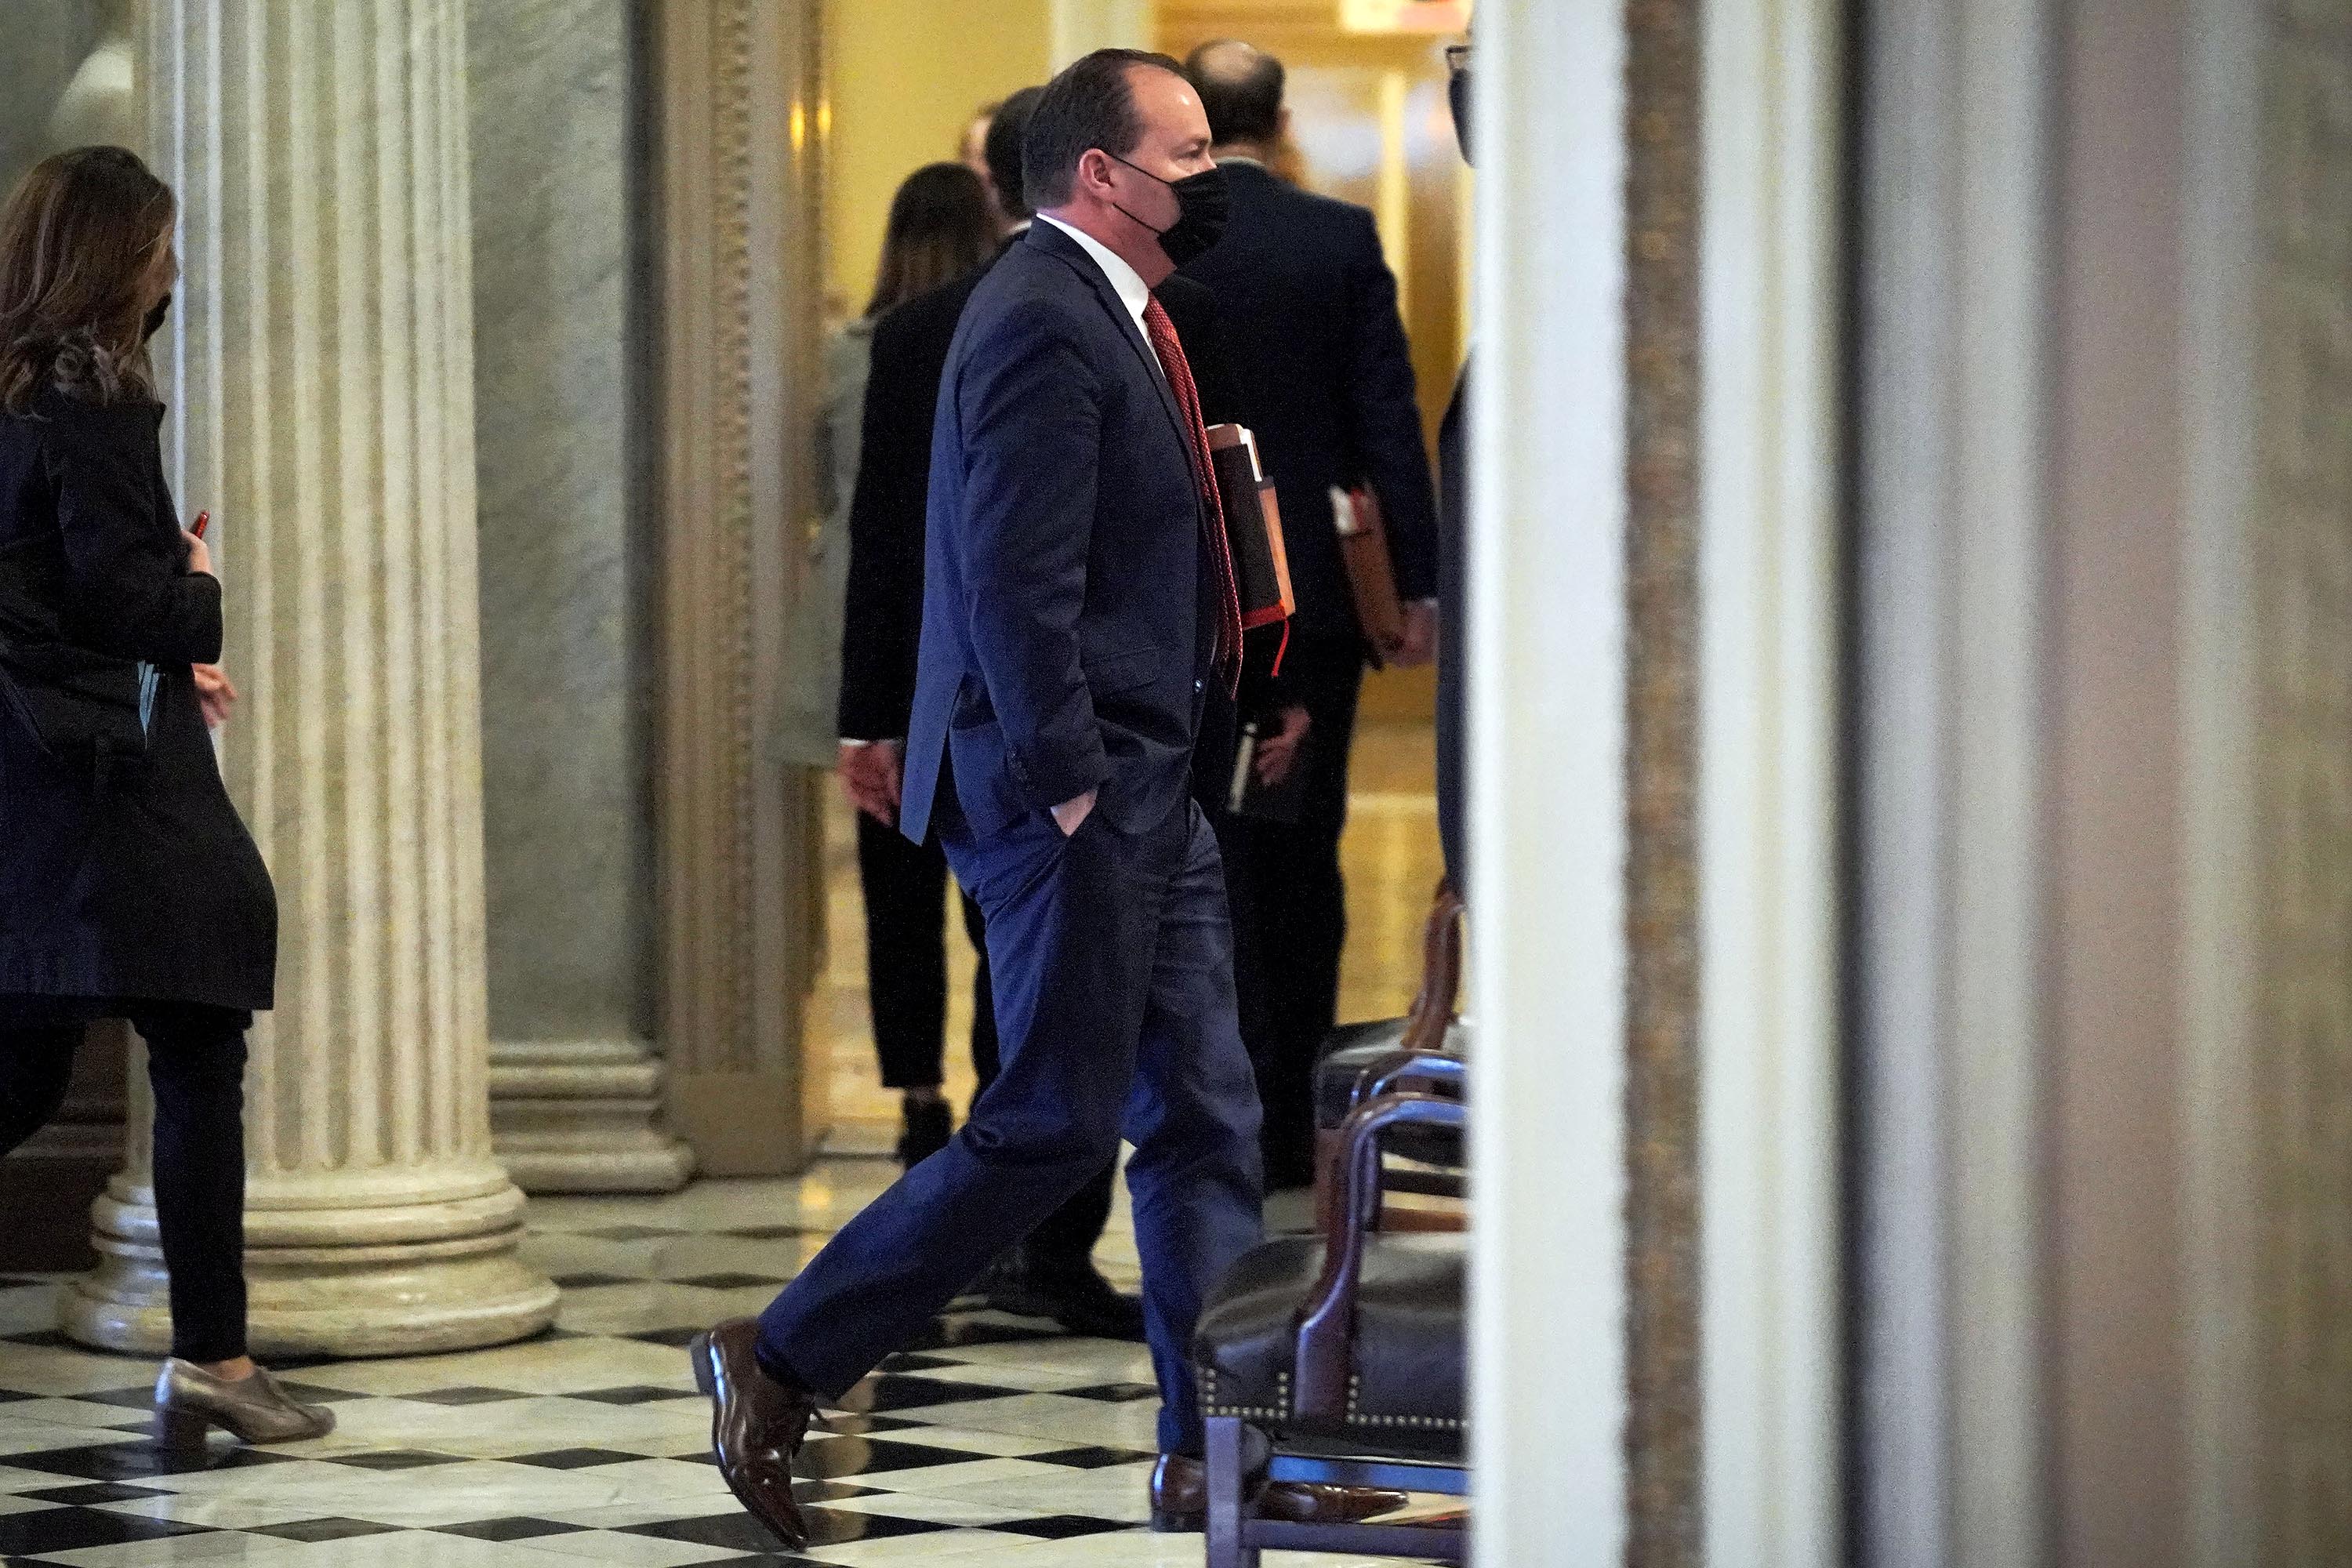 Sen. Mike Lee (R-UT) heads to the Senate Chamber before the fifth day of the Senate Impeachment trials on Saturday, February 13, 2021.